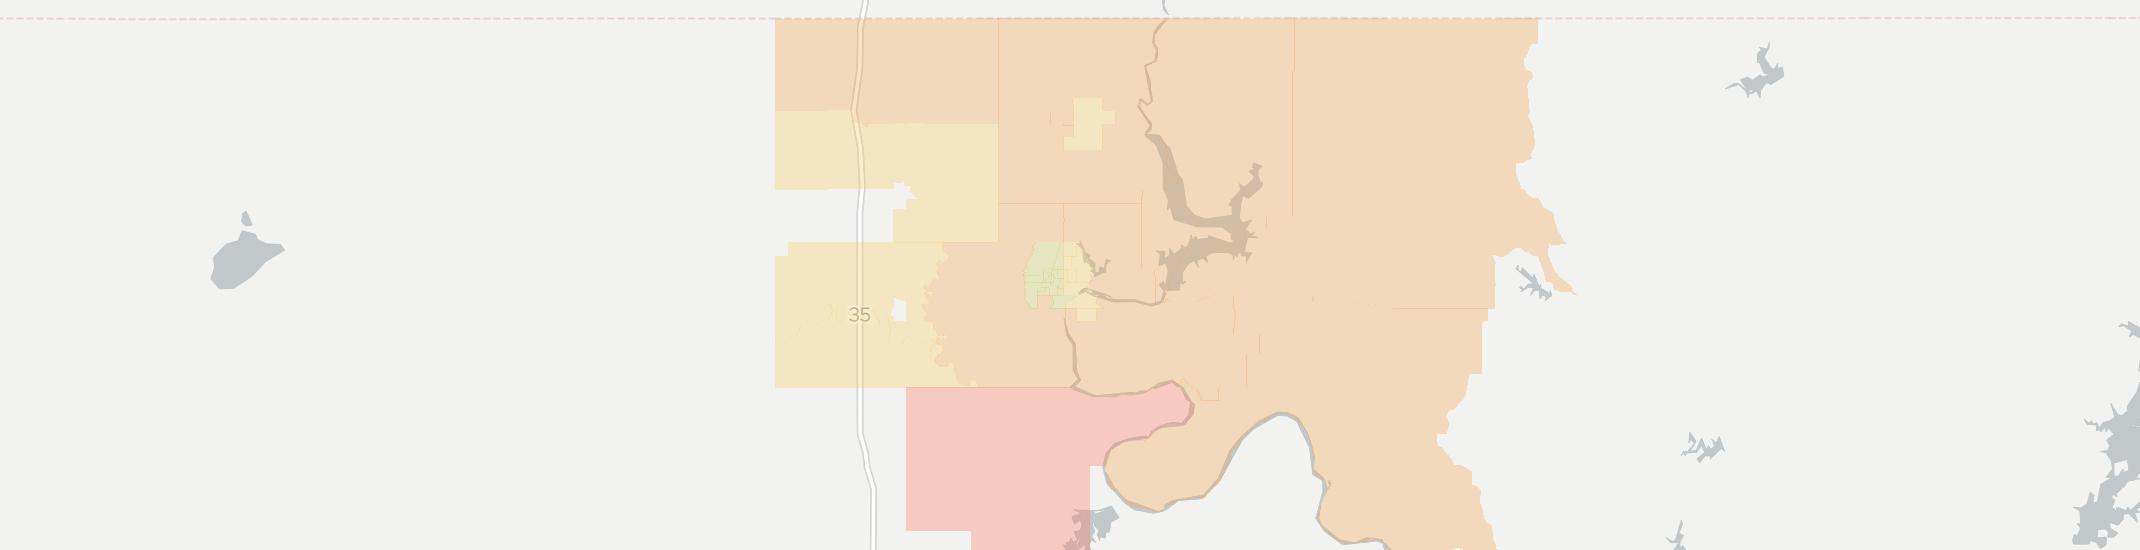 Ponca City Internet Competition Map. Click for interactive map.